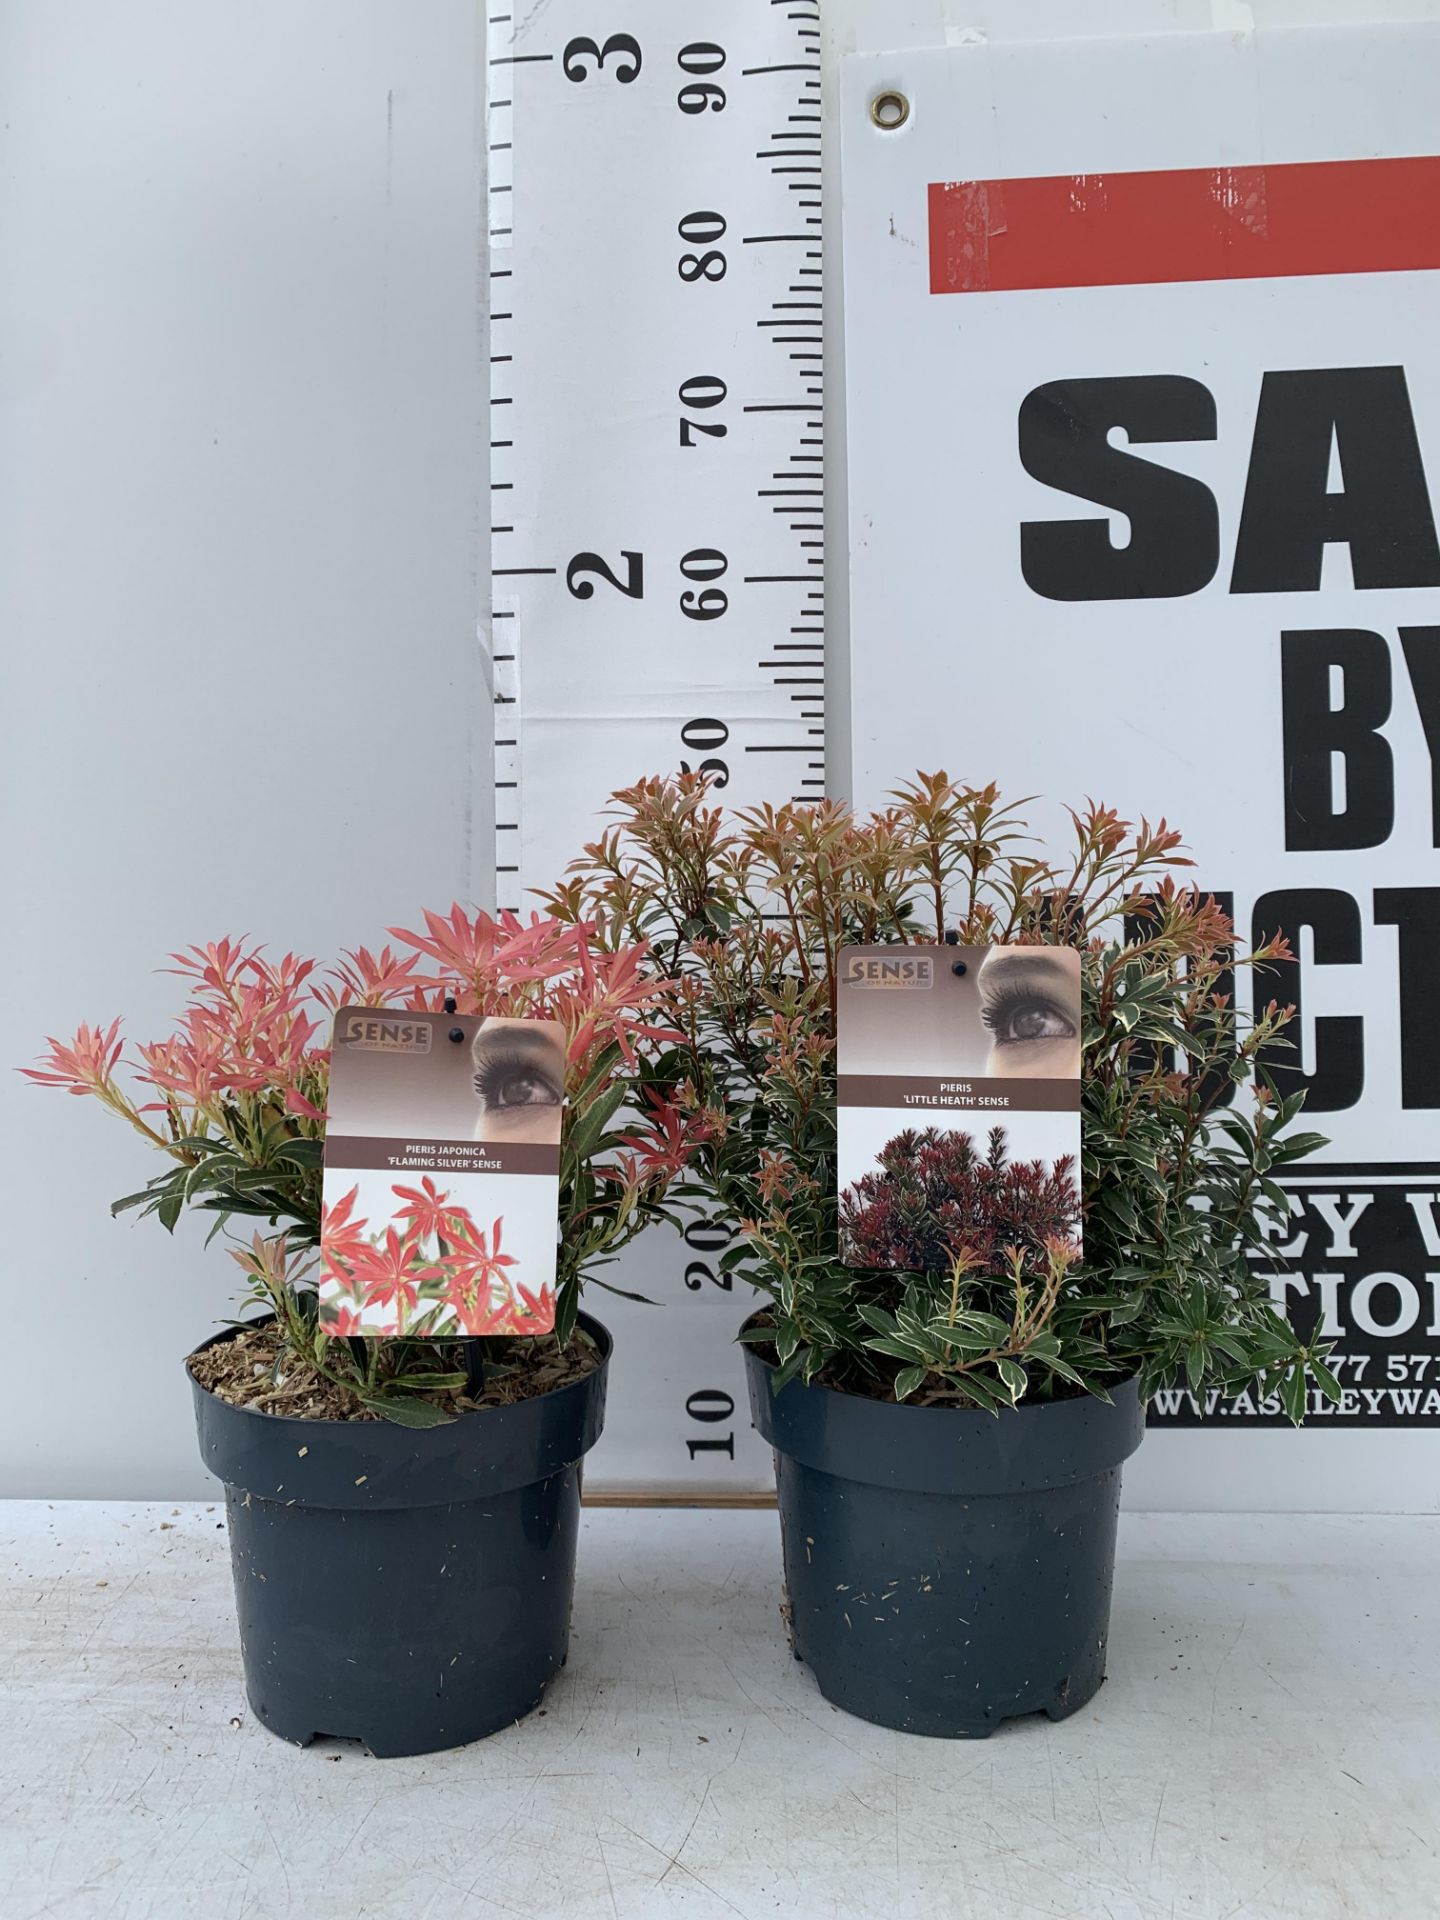 TWO PIERIS JAPONICA LITTLE HEATH AND FLAMING SILVER IN 3 LTR POTS 45CM TALL PLUS VAT TO BE SOLD - Image 3 of 10